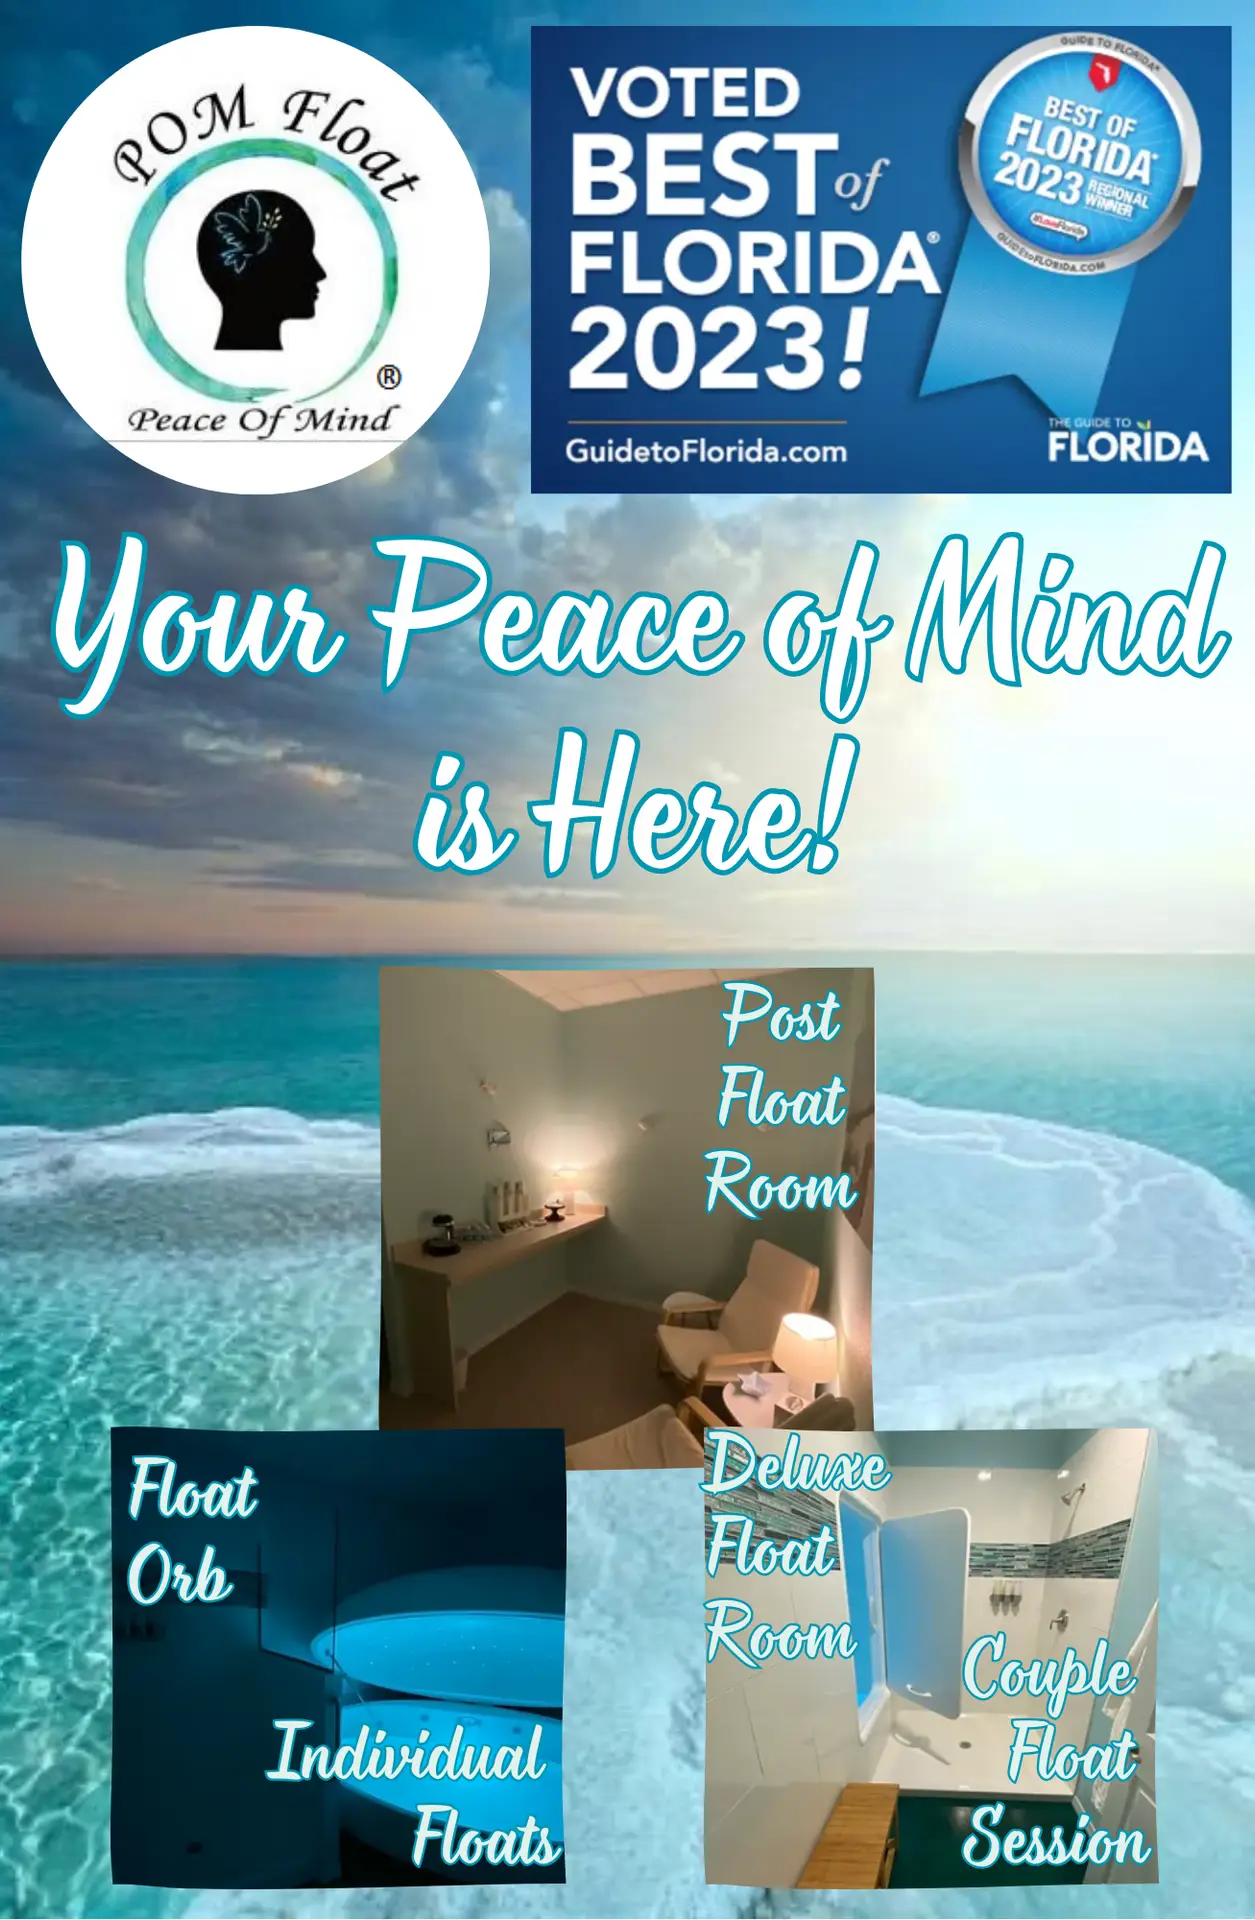 dead sea photo Floating Pod Pictures on top. Picture reads Your Peace of Mind is Here!